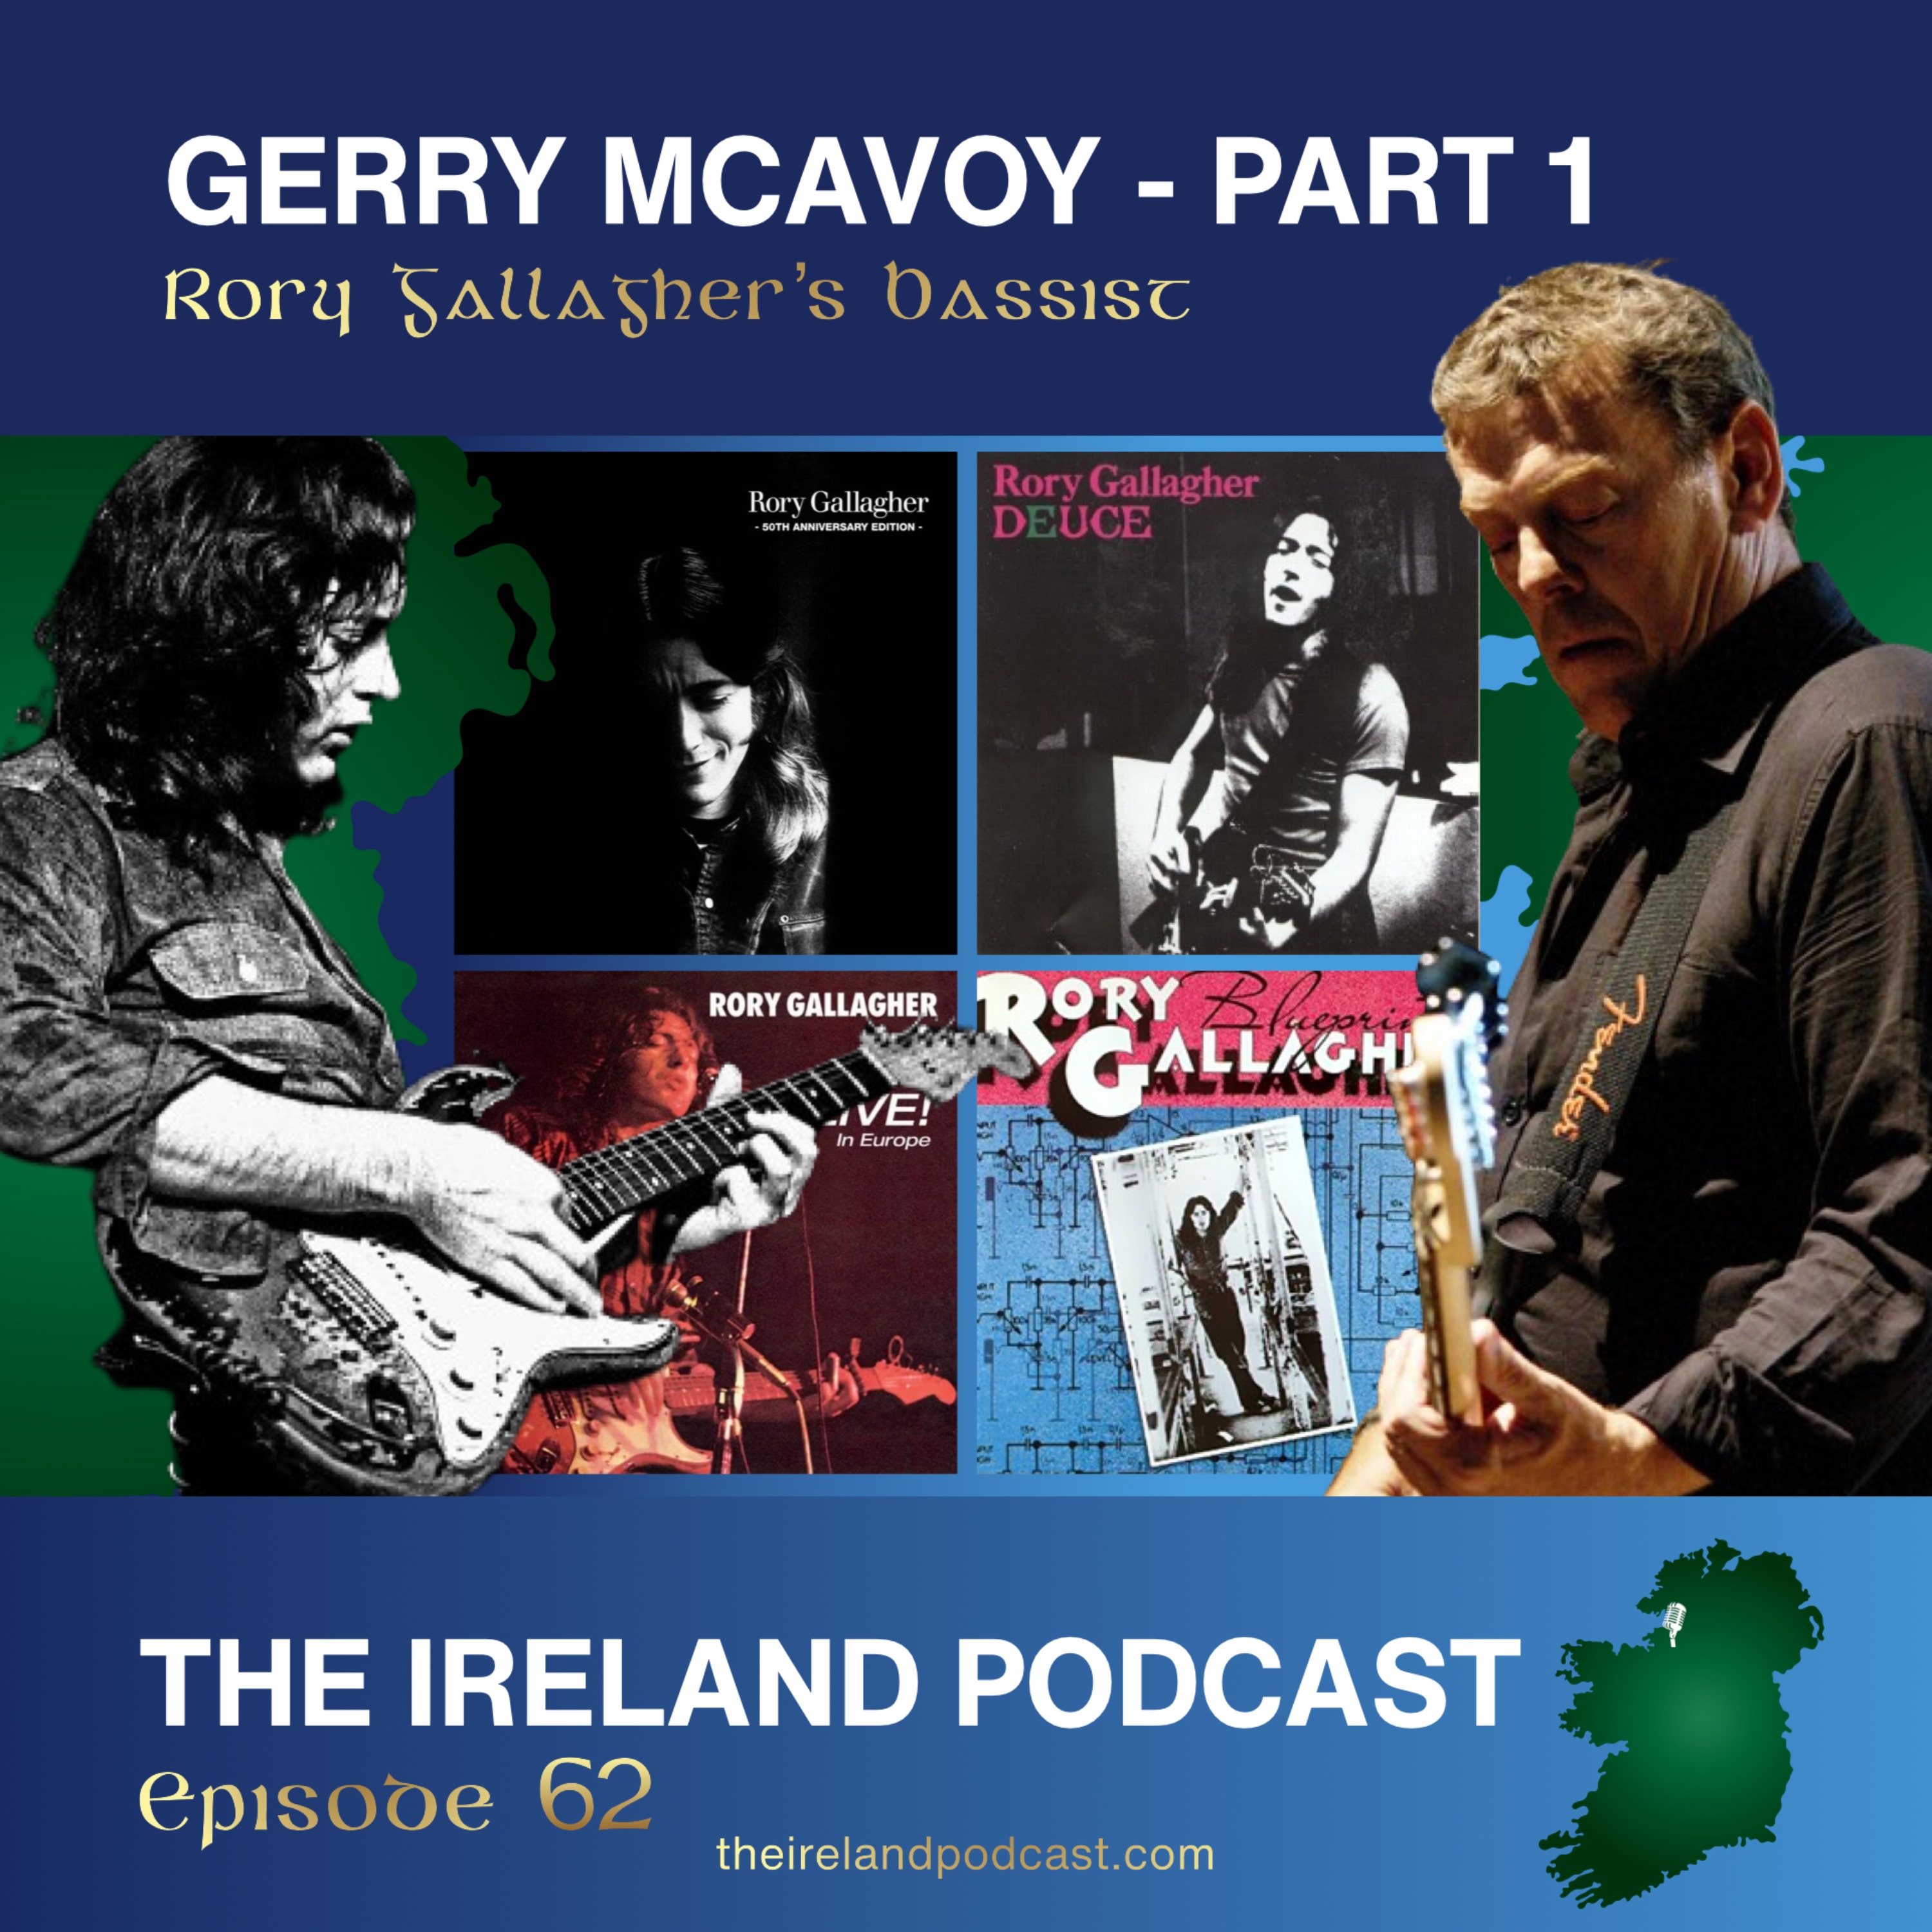 62. Gerry McAvoy: Rory Gallagher's Bassist - Part 1